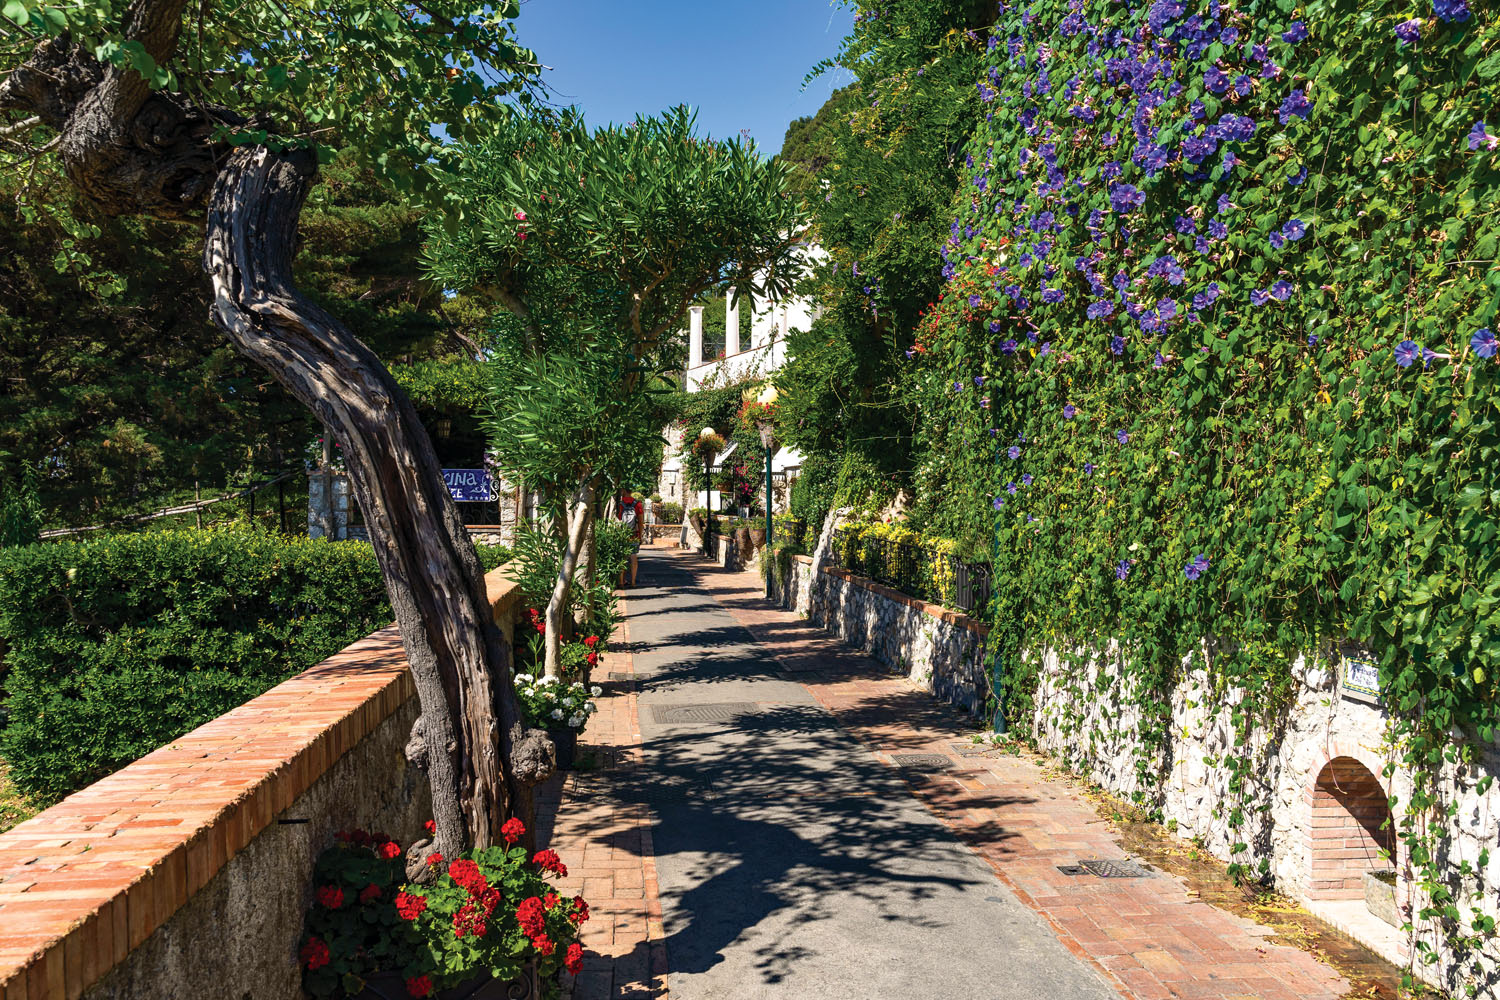 2A74X37 Capri promenade in a beautiful summer day leading to Gardens of Augustus, Campania, Italy